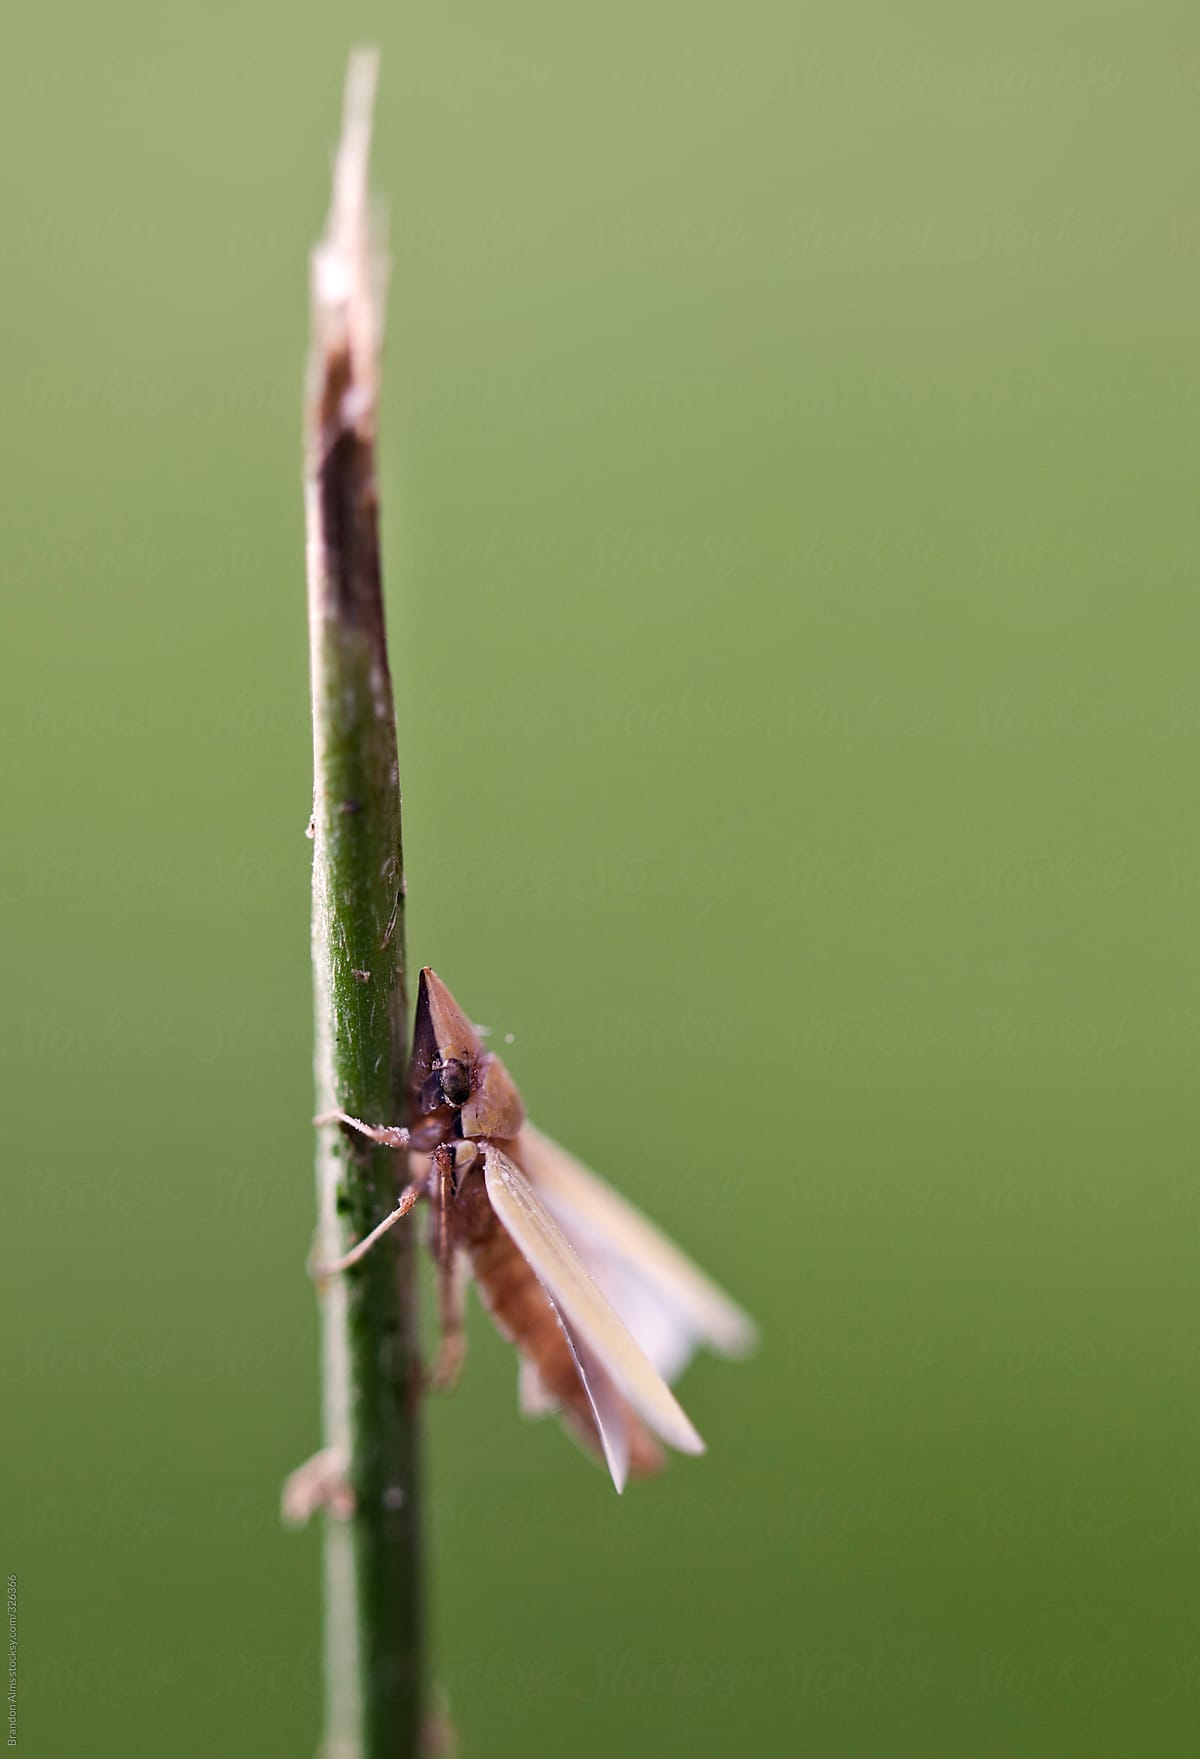 Tiny Leafhopper Insect on a Blade of Grass